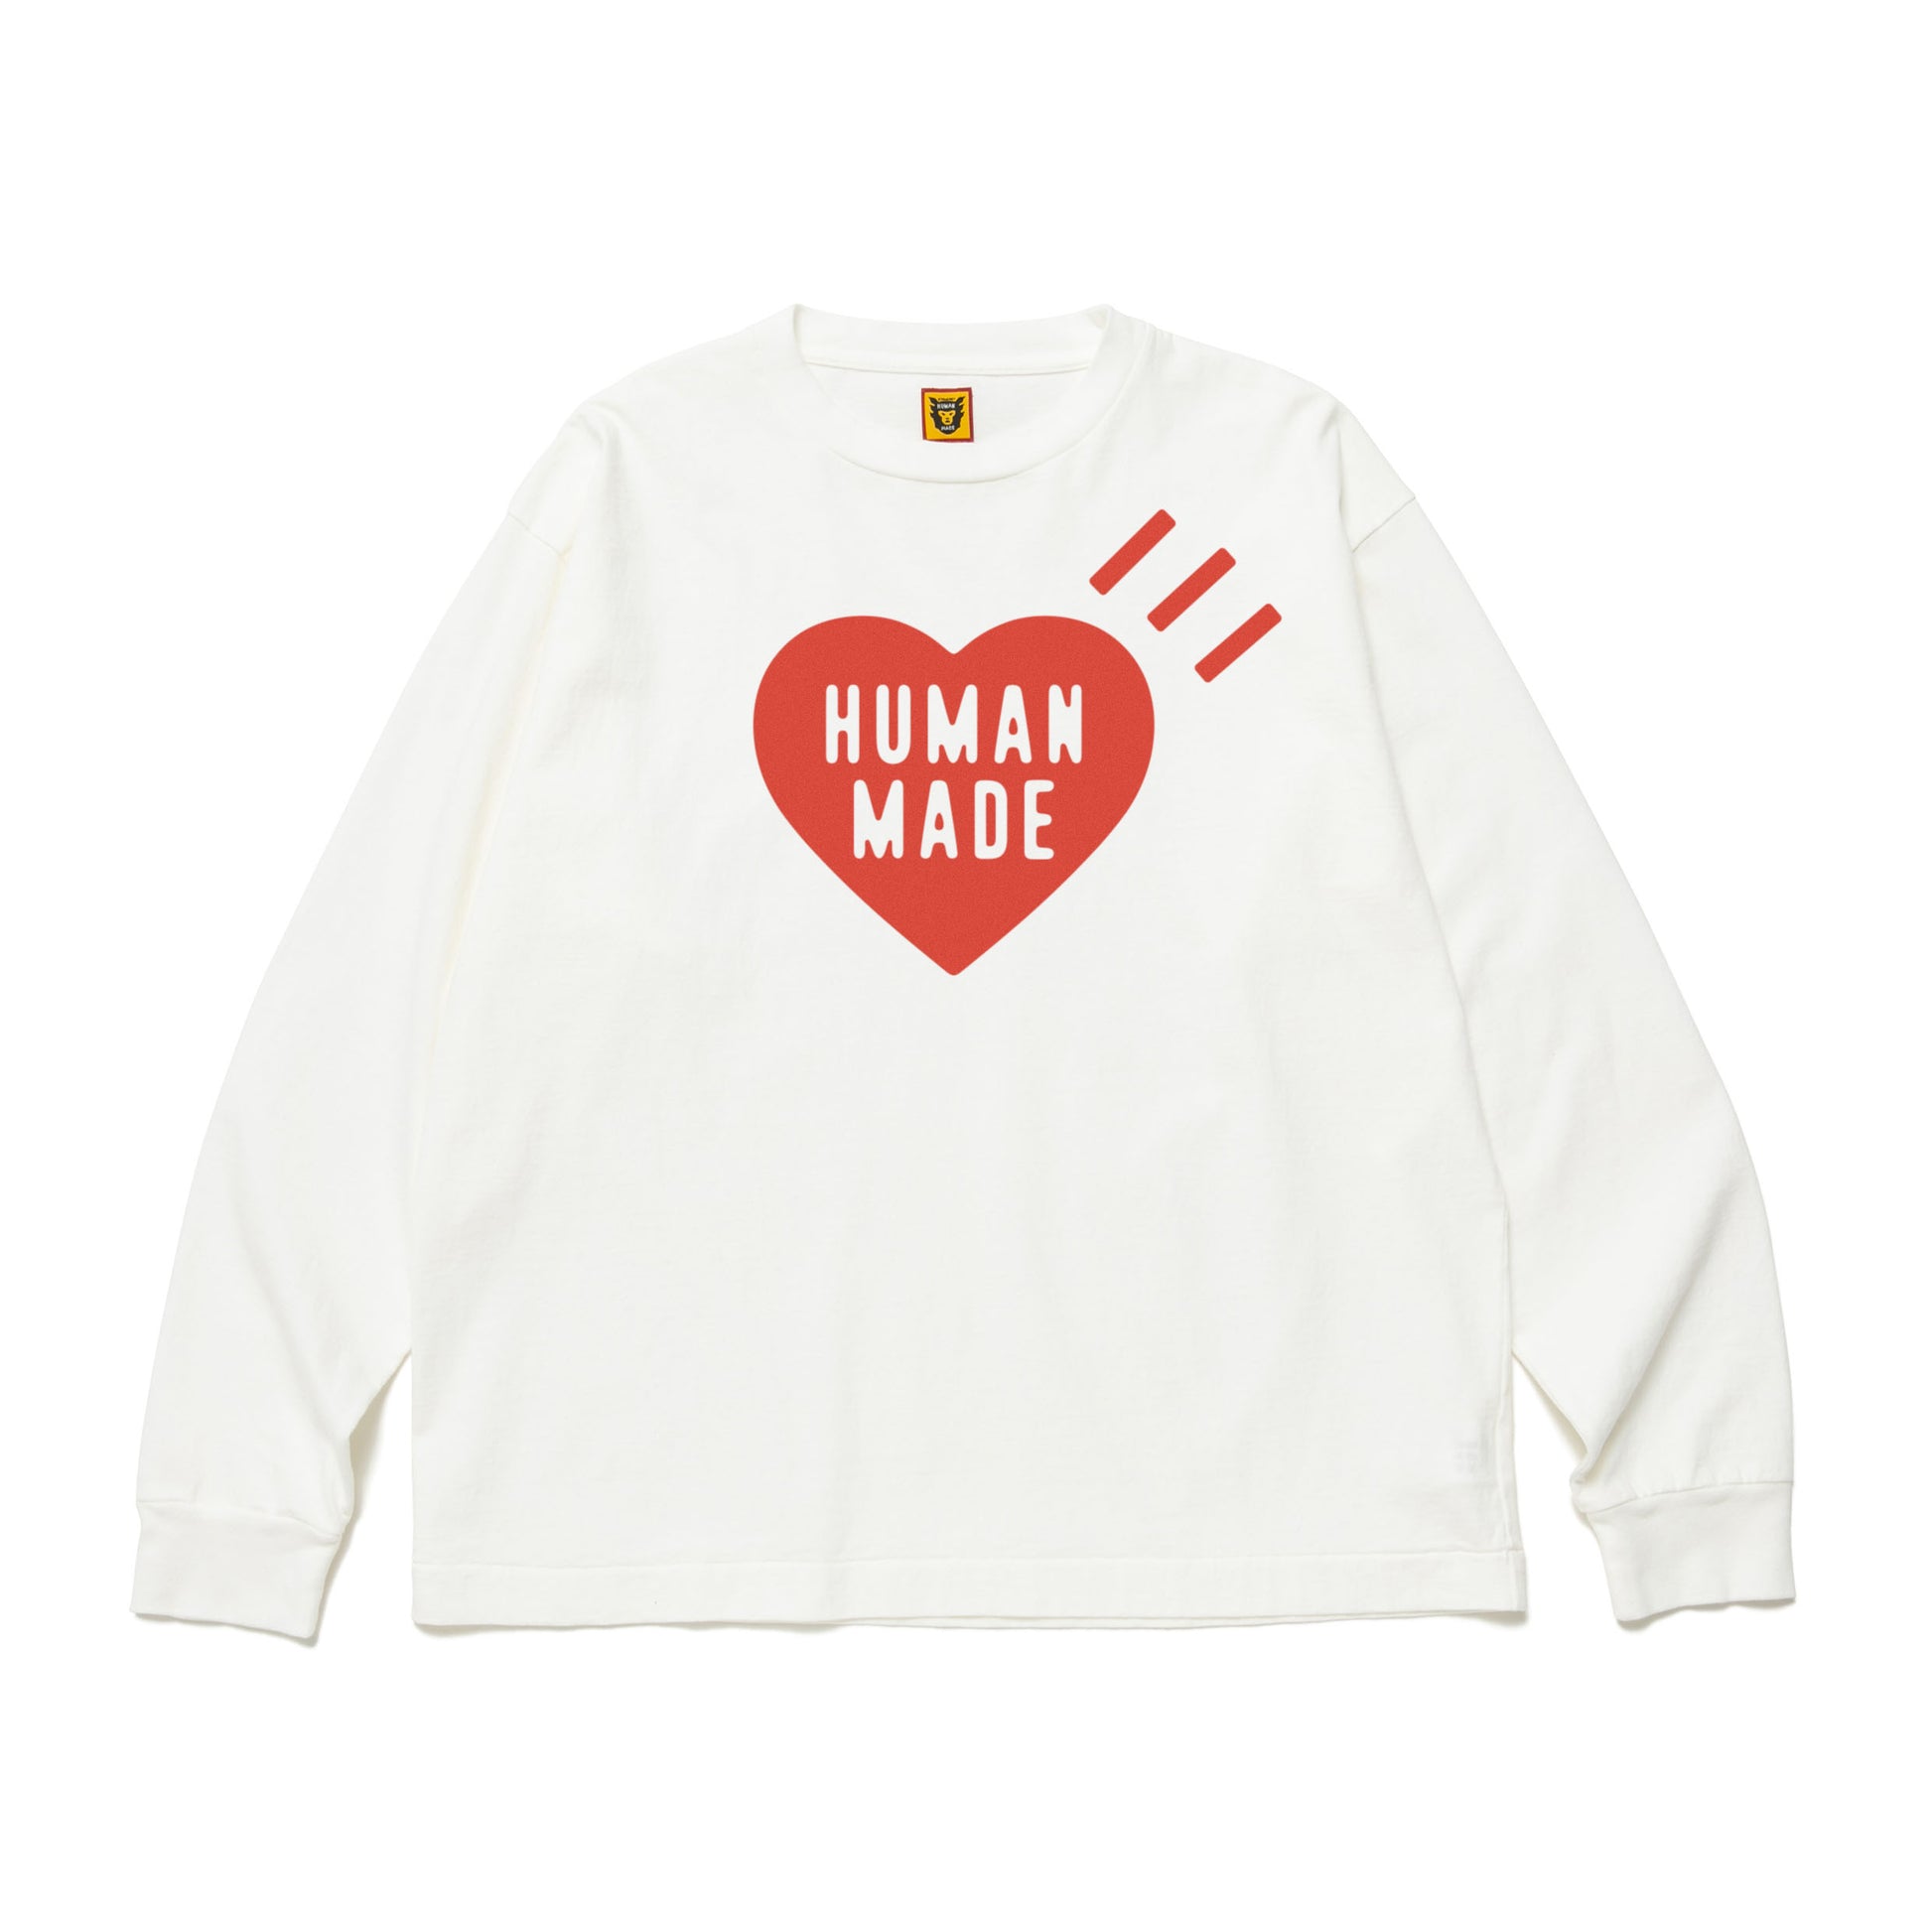 DAILY L/S T-SHIRT #261120 – HUMAN MADE ONLINE STORE